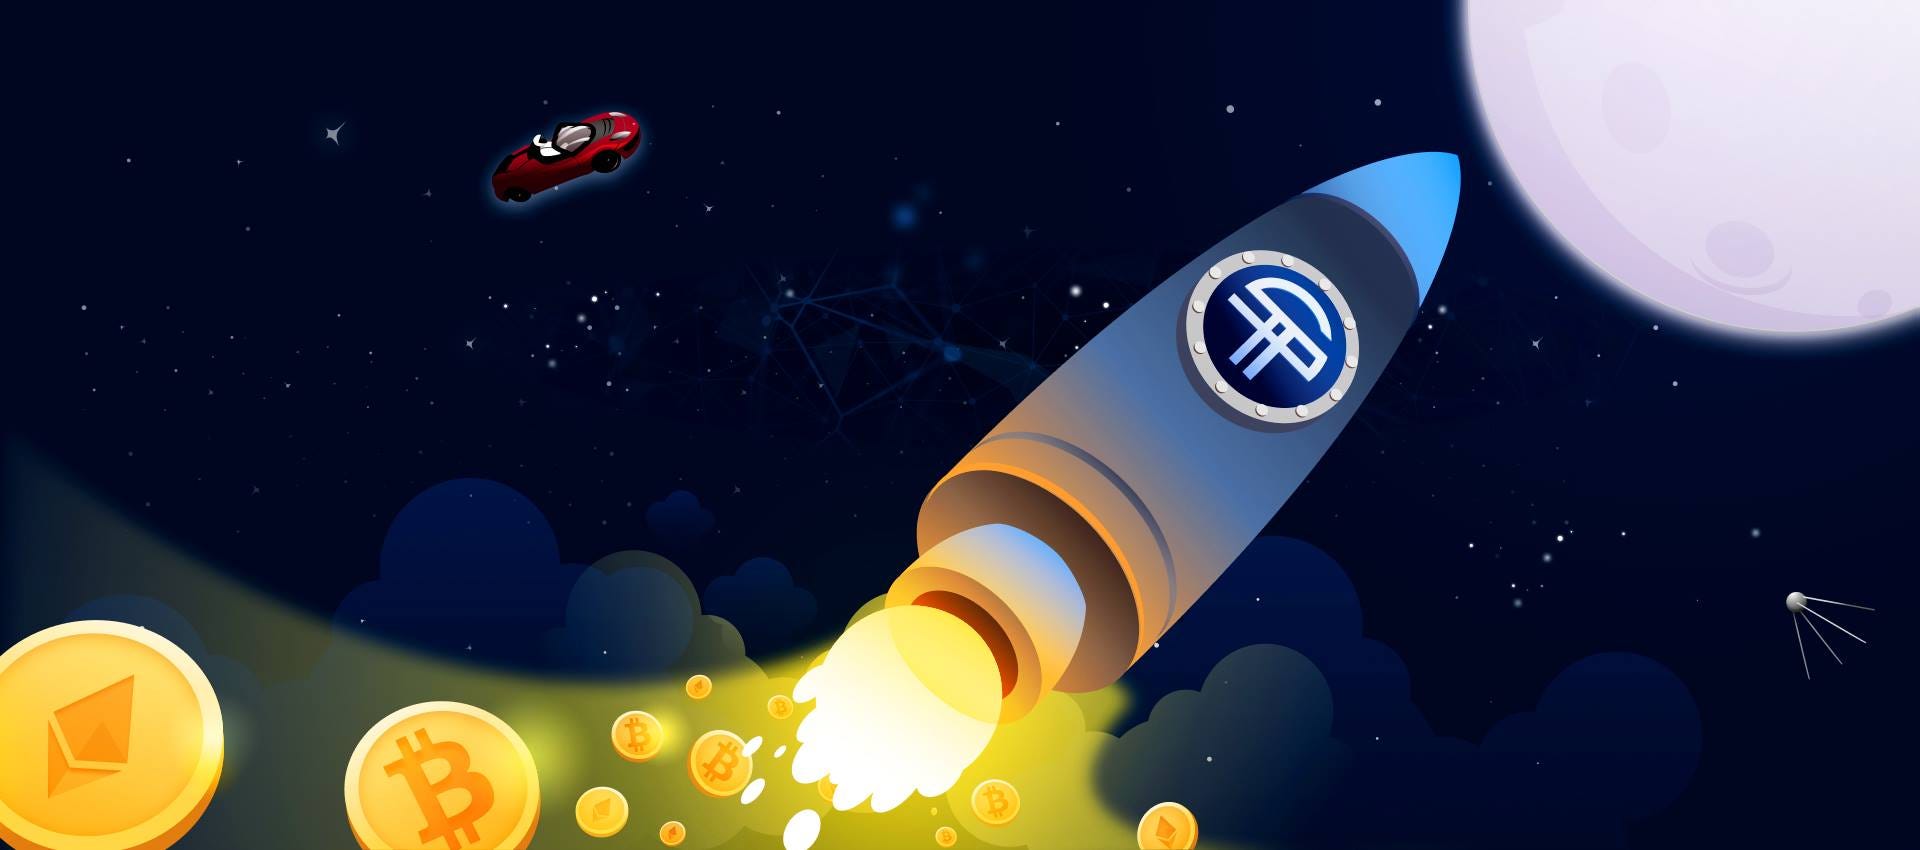 When Moon? the brand-new crypto game driving the community crazy!